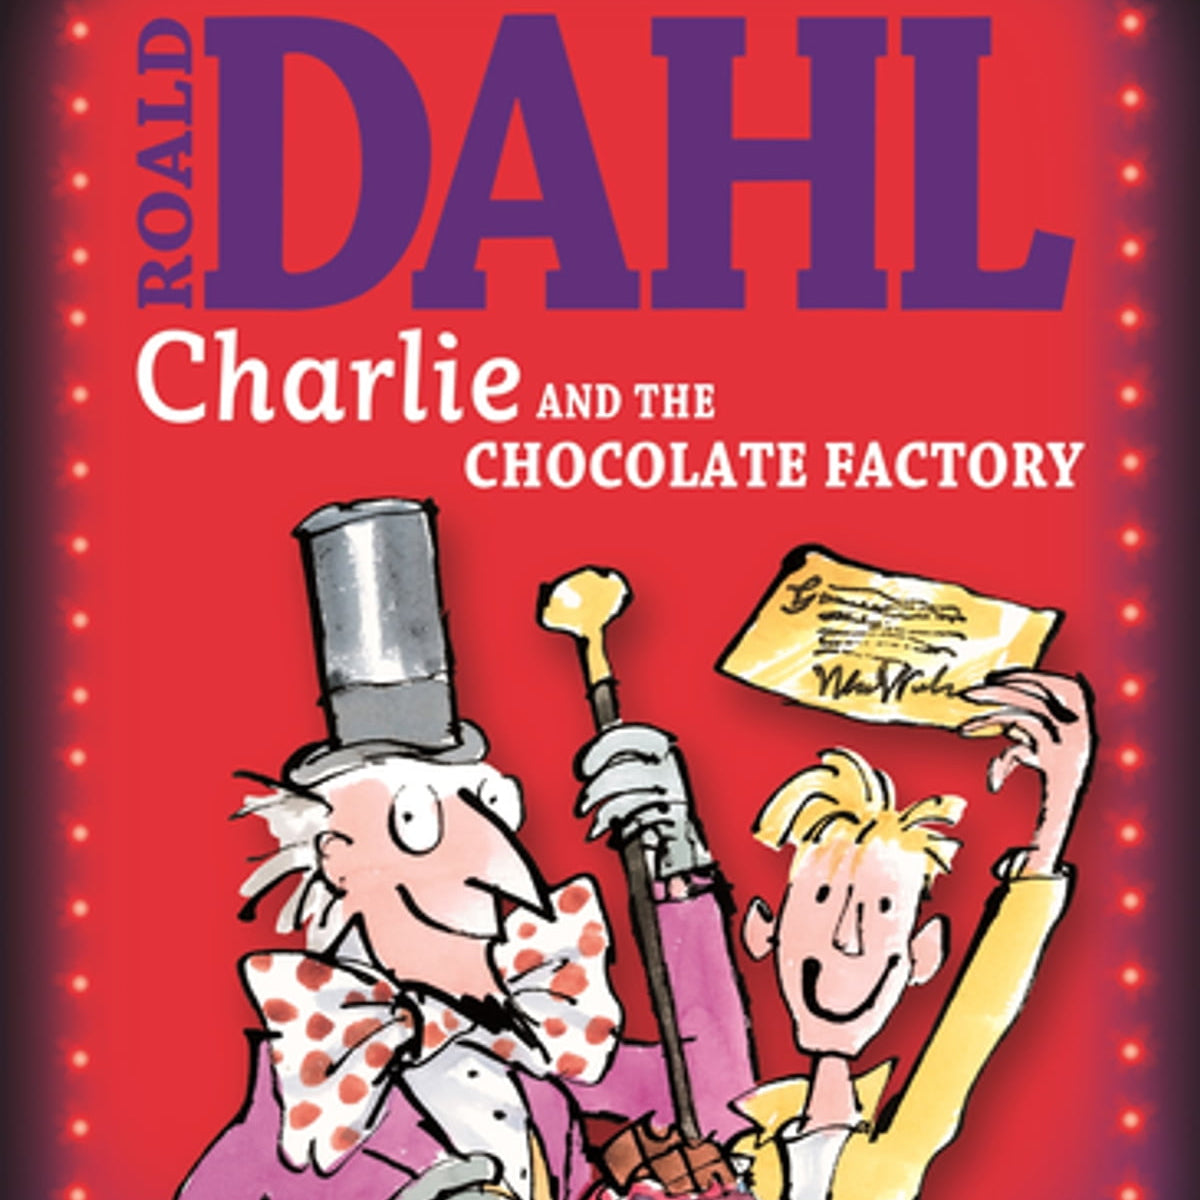 Charlie and the Chocolate Factory by Roald Dahl - Chapter 1 Extract on Penguin.co